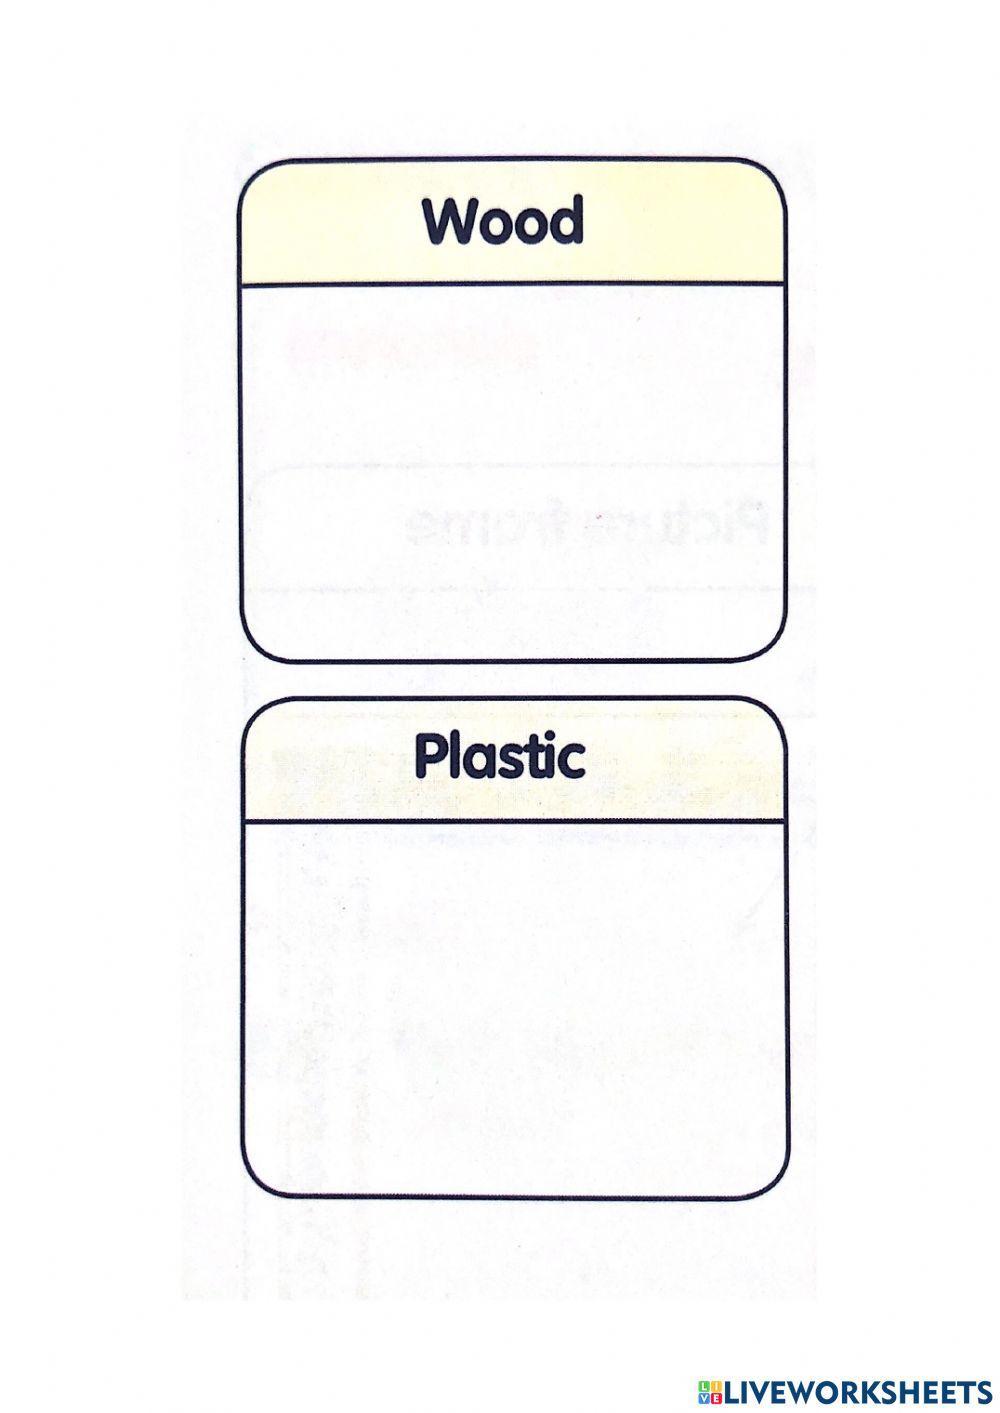 Materials- wood and plastic